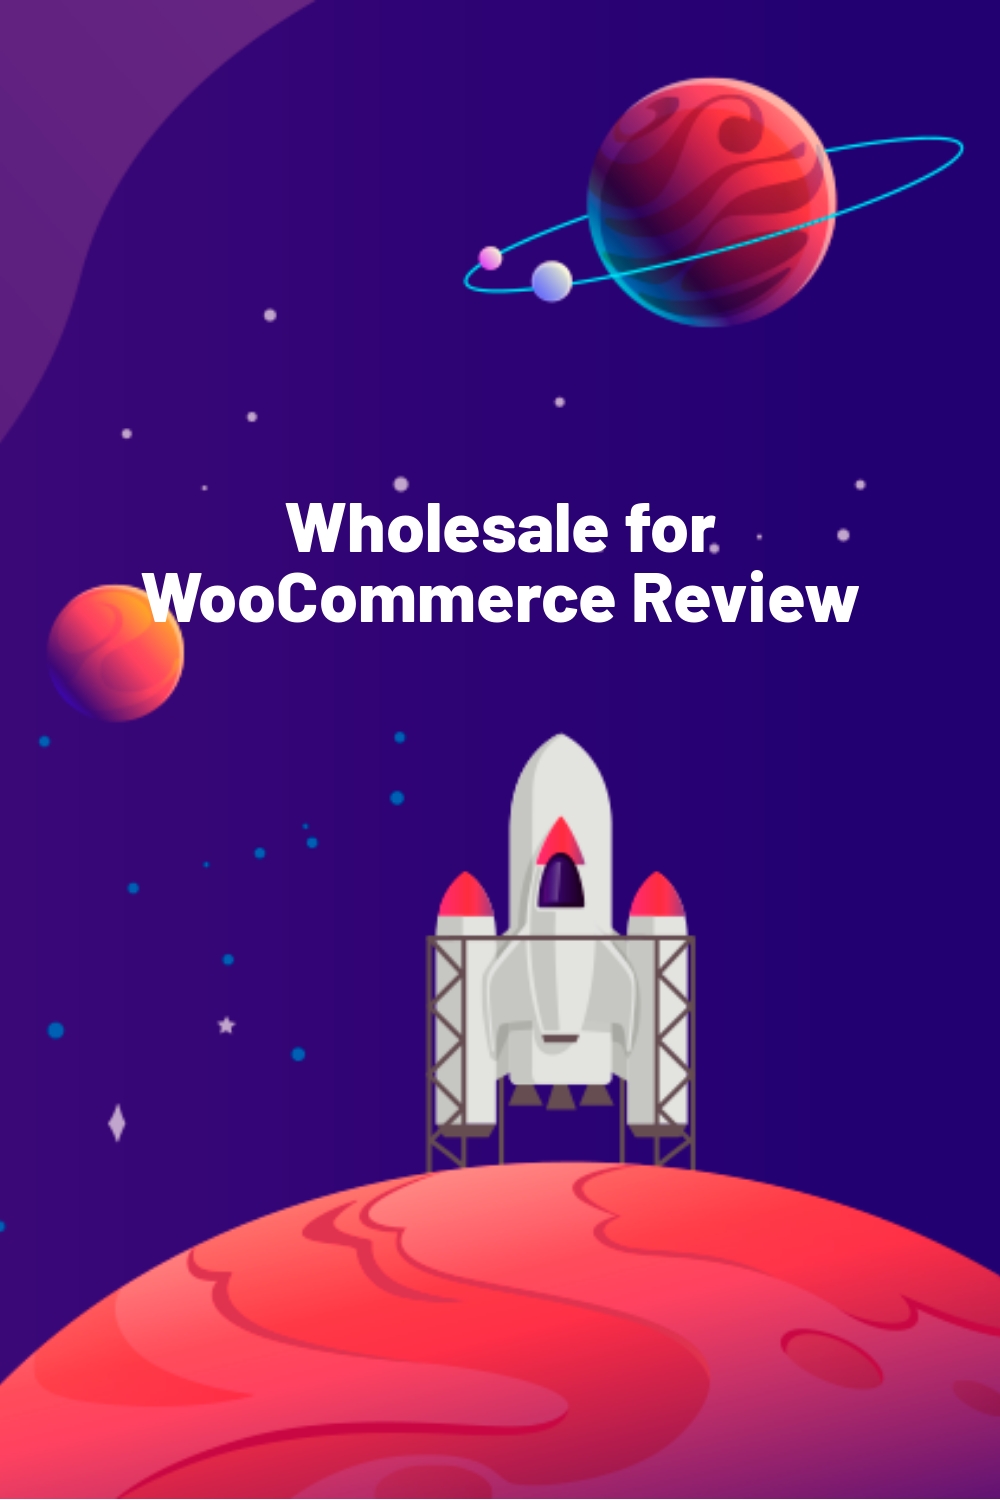 Wholesale for WooCommerce Review